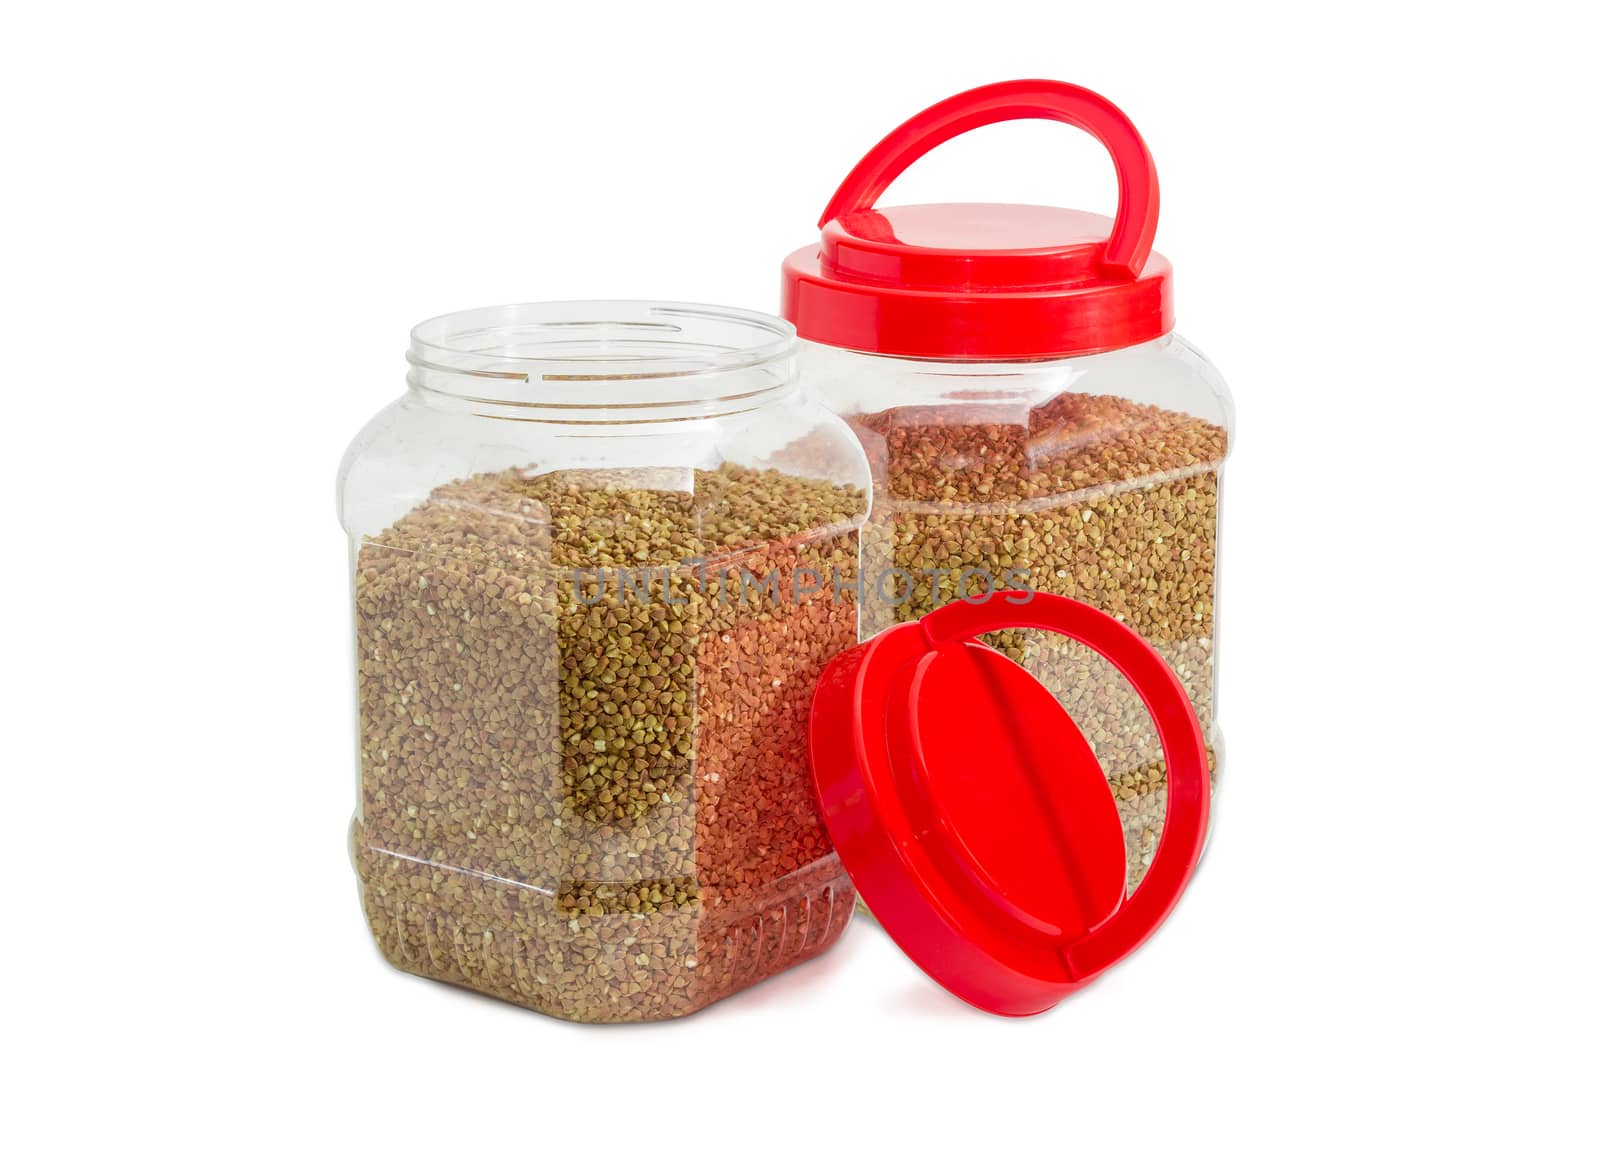 Buckwheat groats in two plastic containers with red covers by anmbph